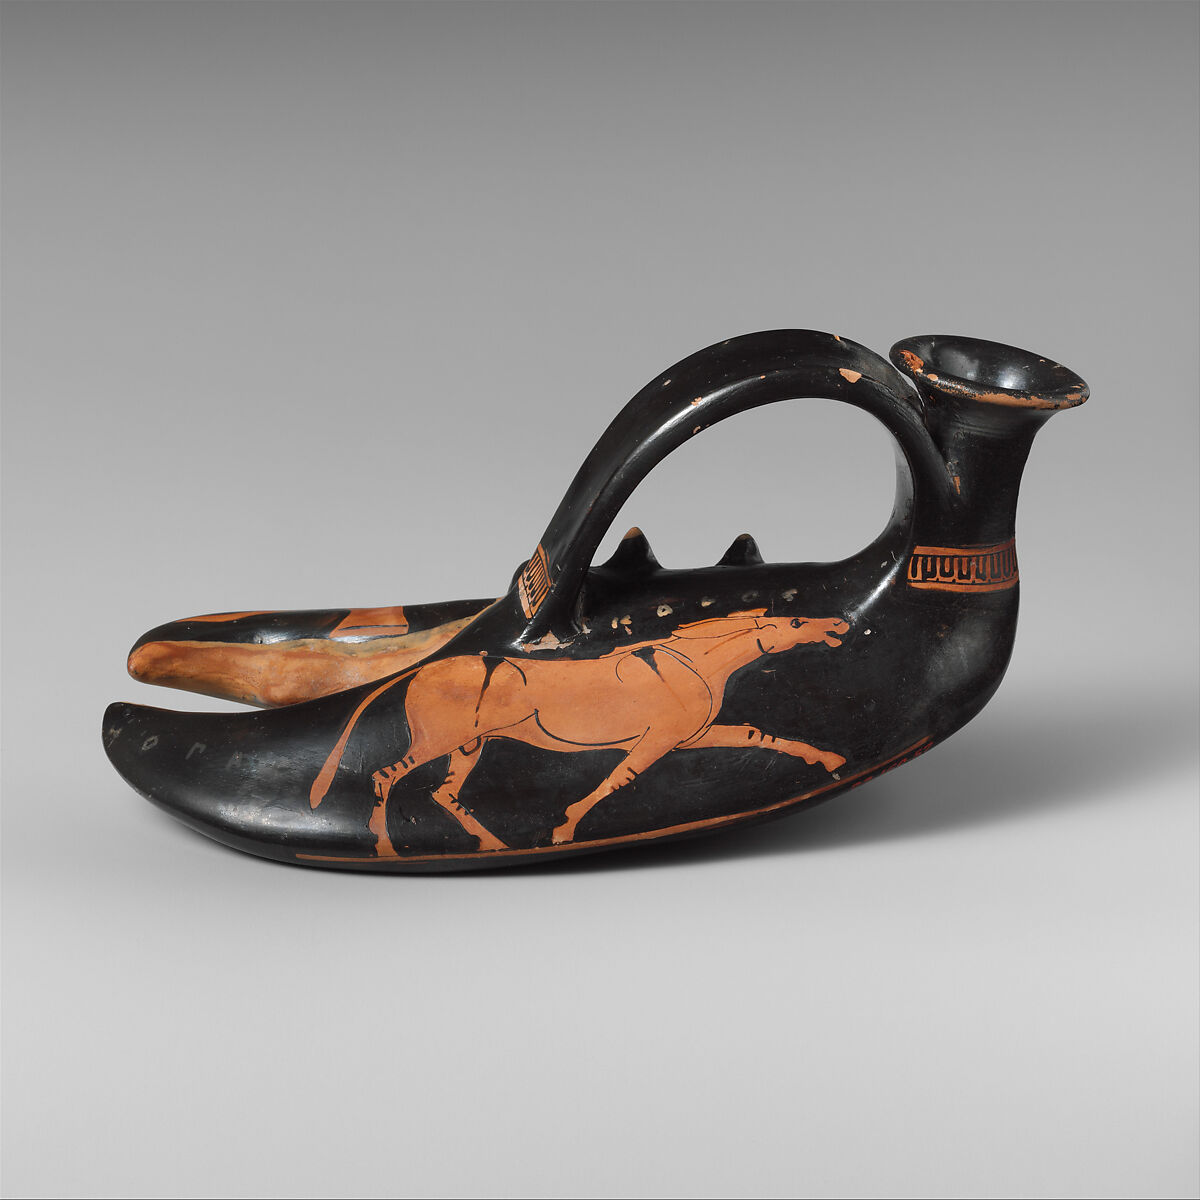 Terracotta vase in the form of a lobster claw, Attributed to the Class of Seven Lobster-Claws 
, Terracotta, Greek, Attic 